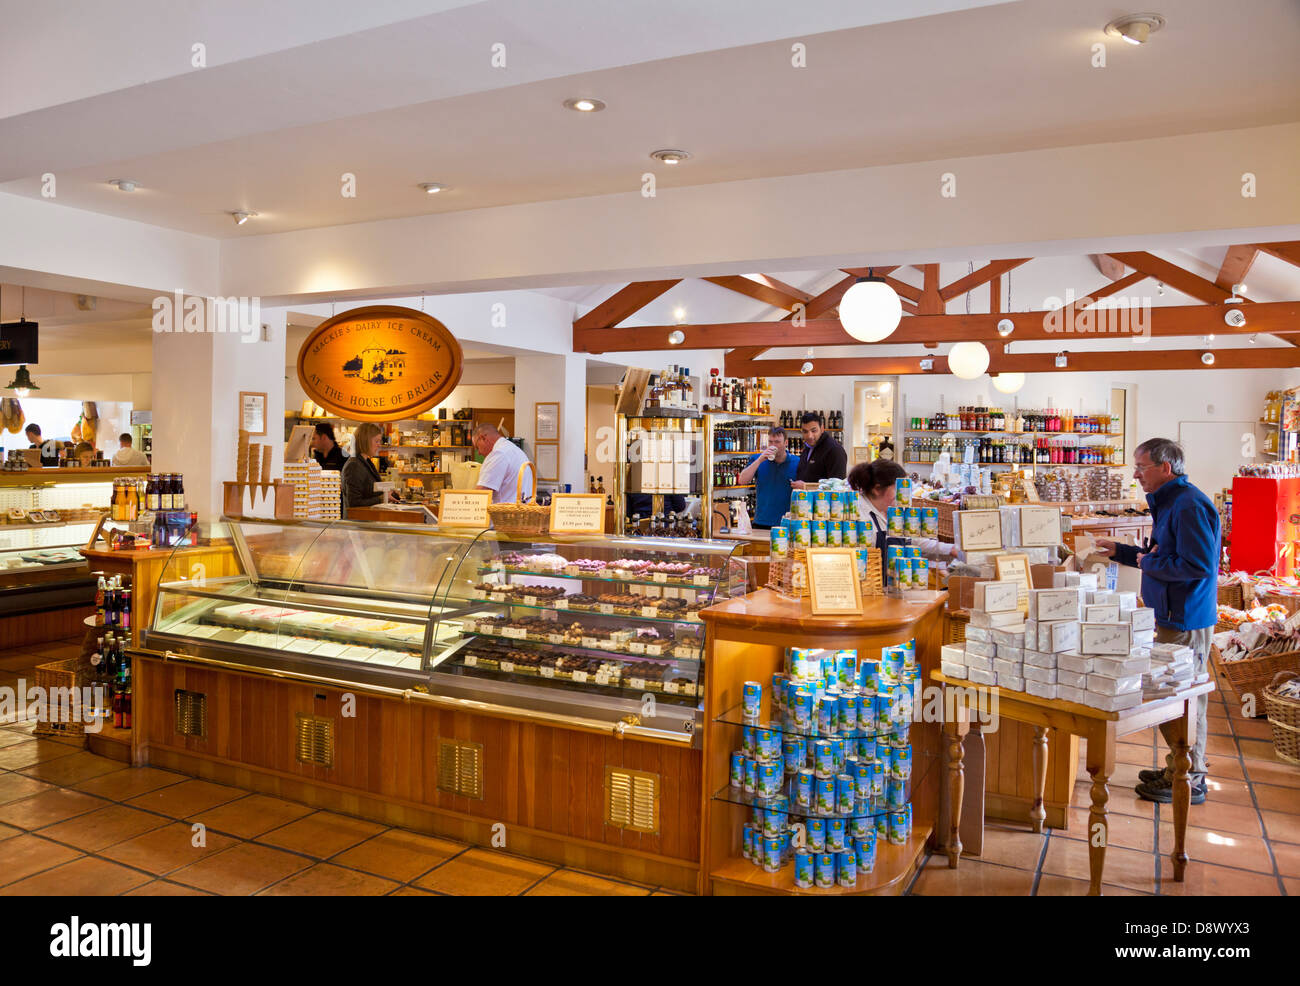 Inside the Food hall of The House of Bruar retail outlet  near Blair Atholl Perth and Kinross Scotland UK GB EU Europe Stock Photo